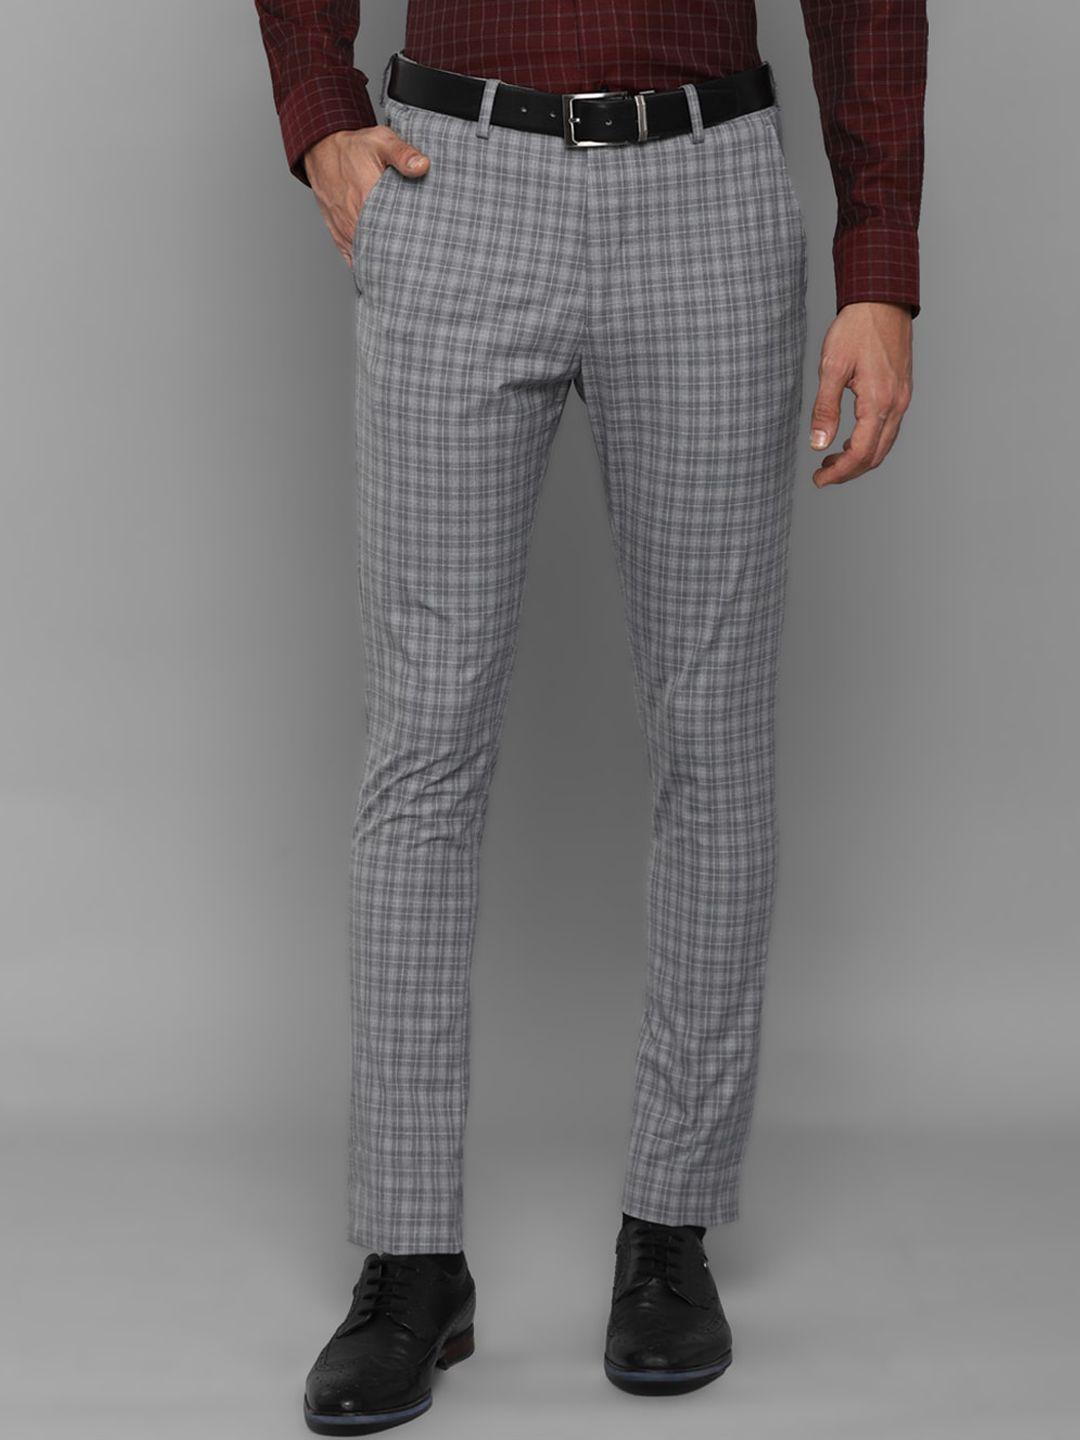 louis philippe men grey checked formal trousers